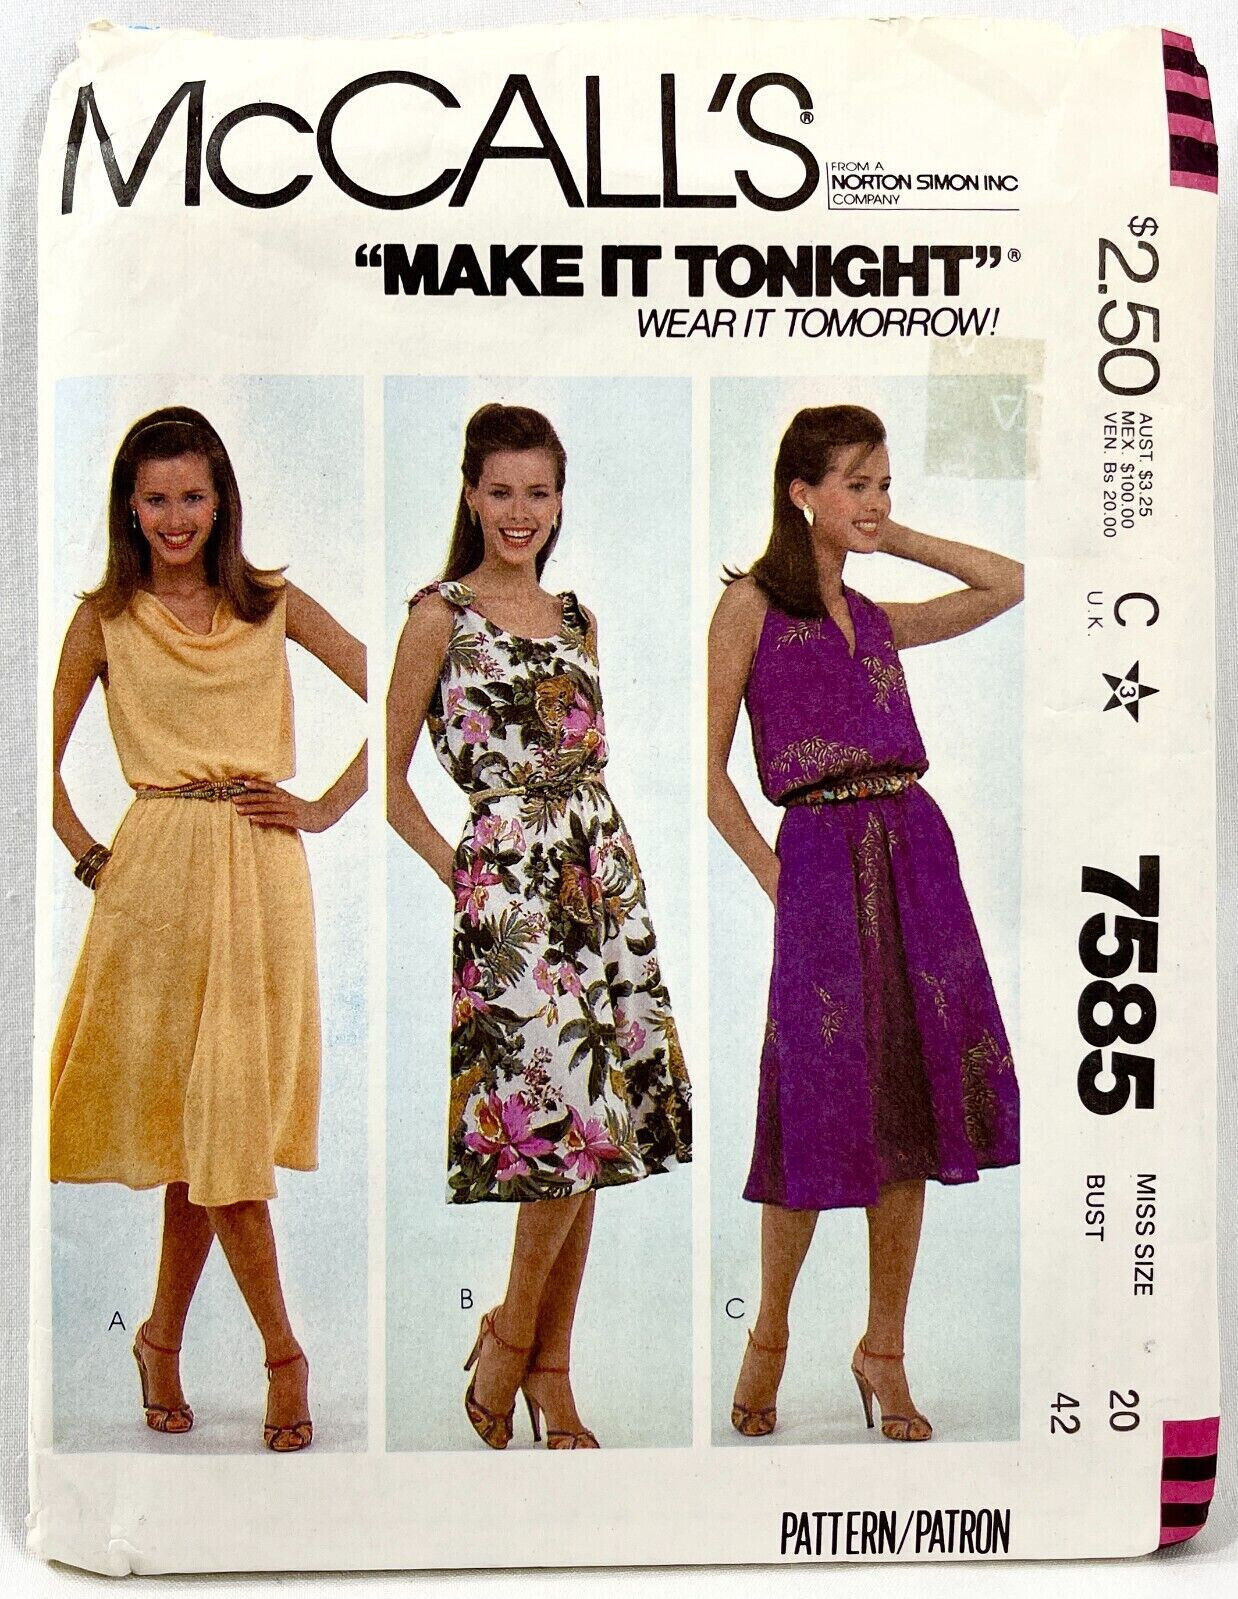 1981 McCalls Sewing Pattern 7585 Womens Dresses 3 Styles Size 20 Vintage 12207